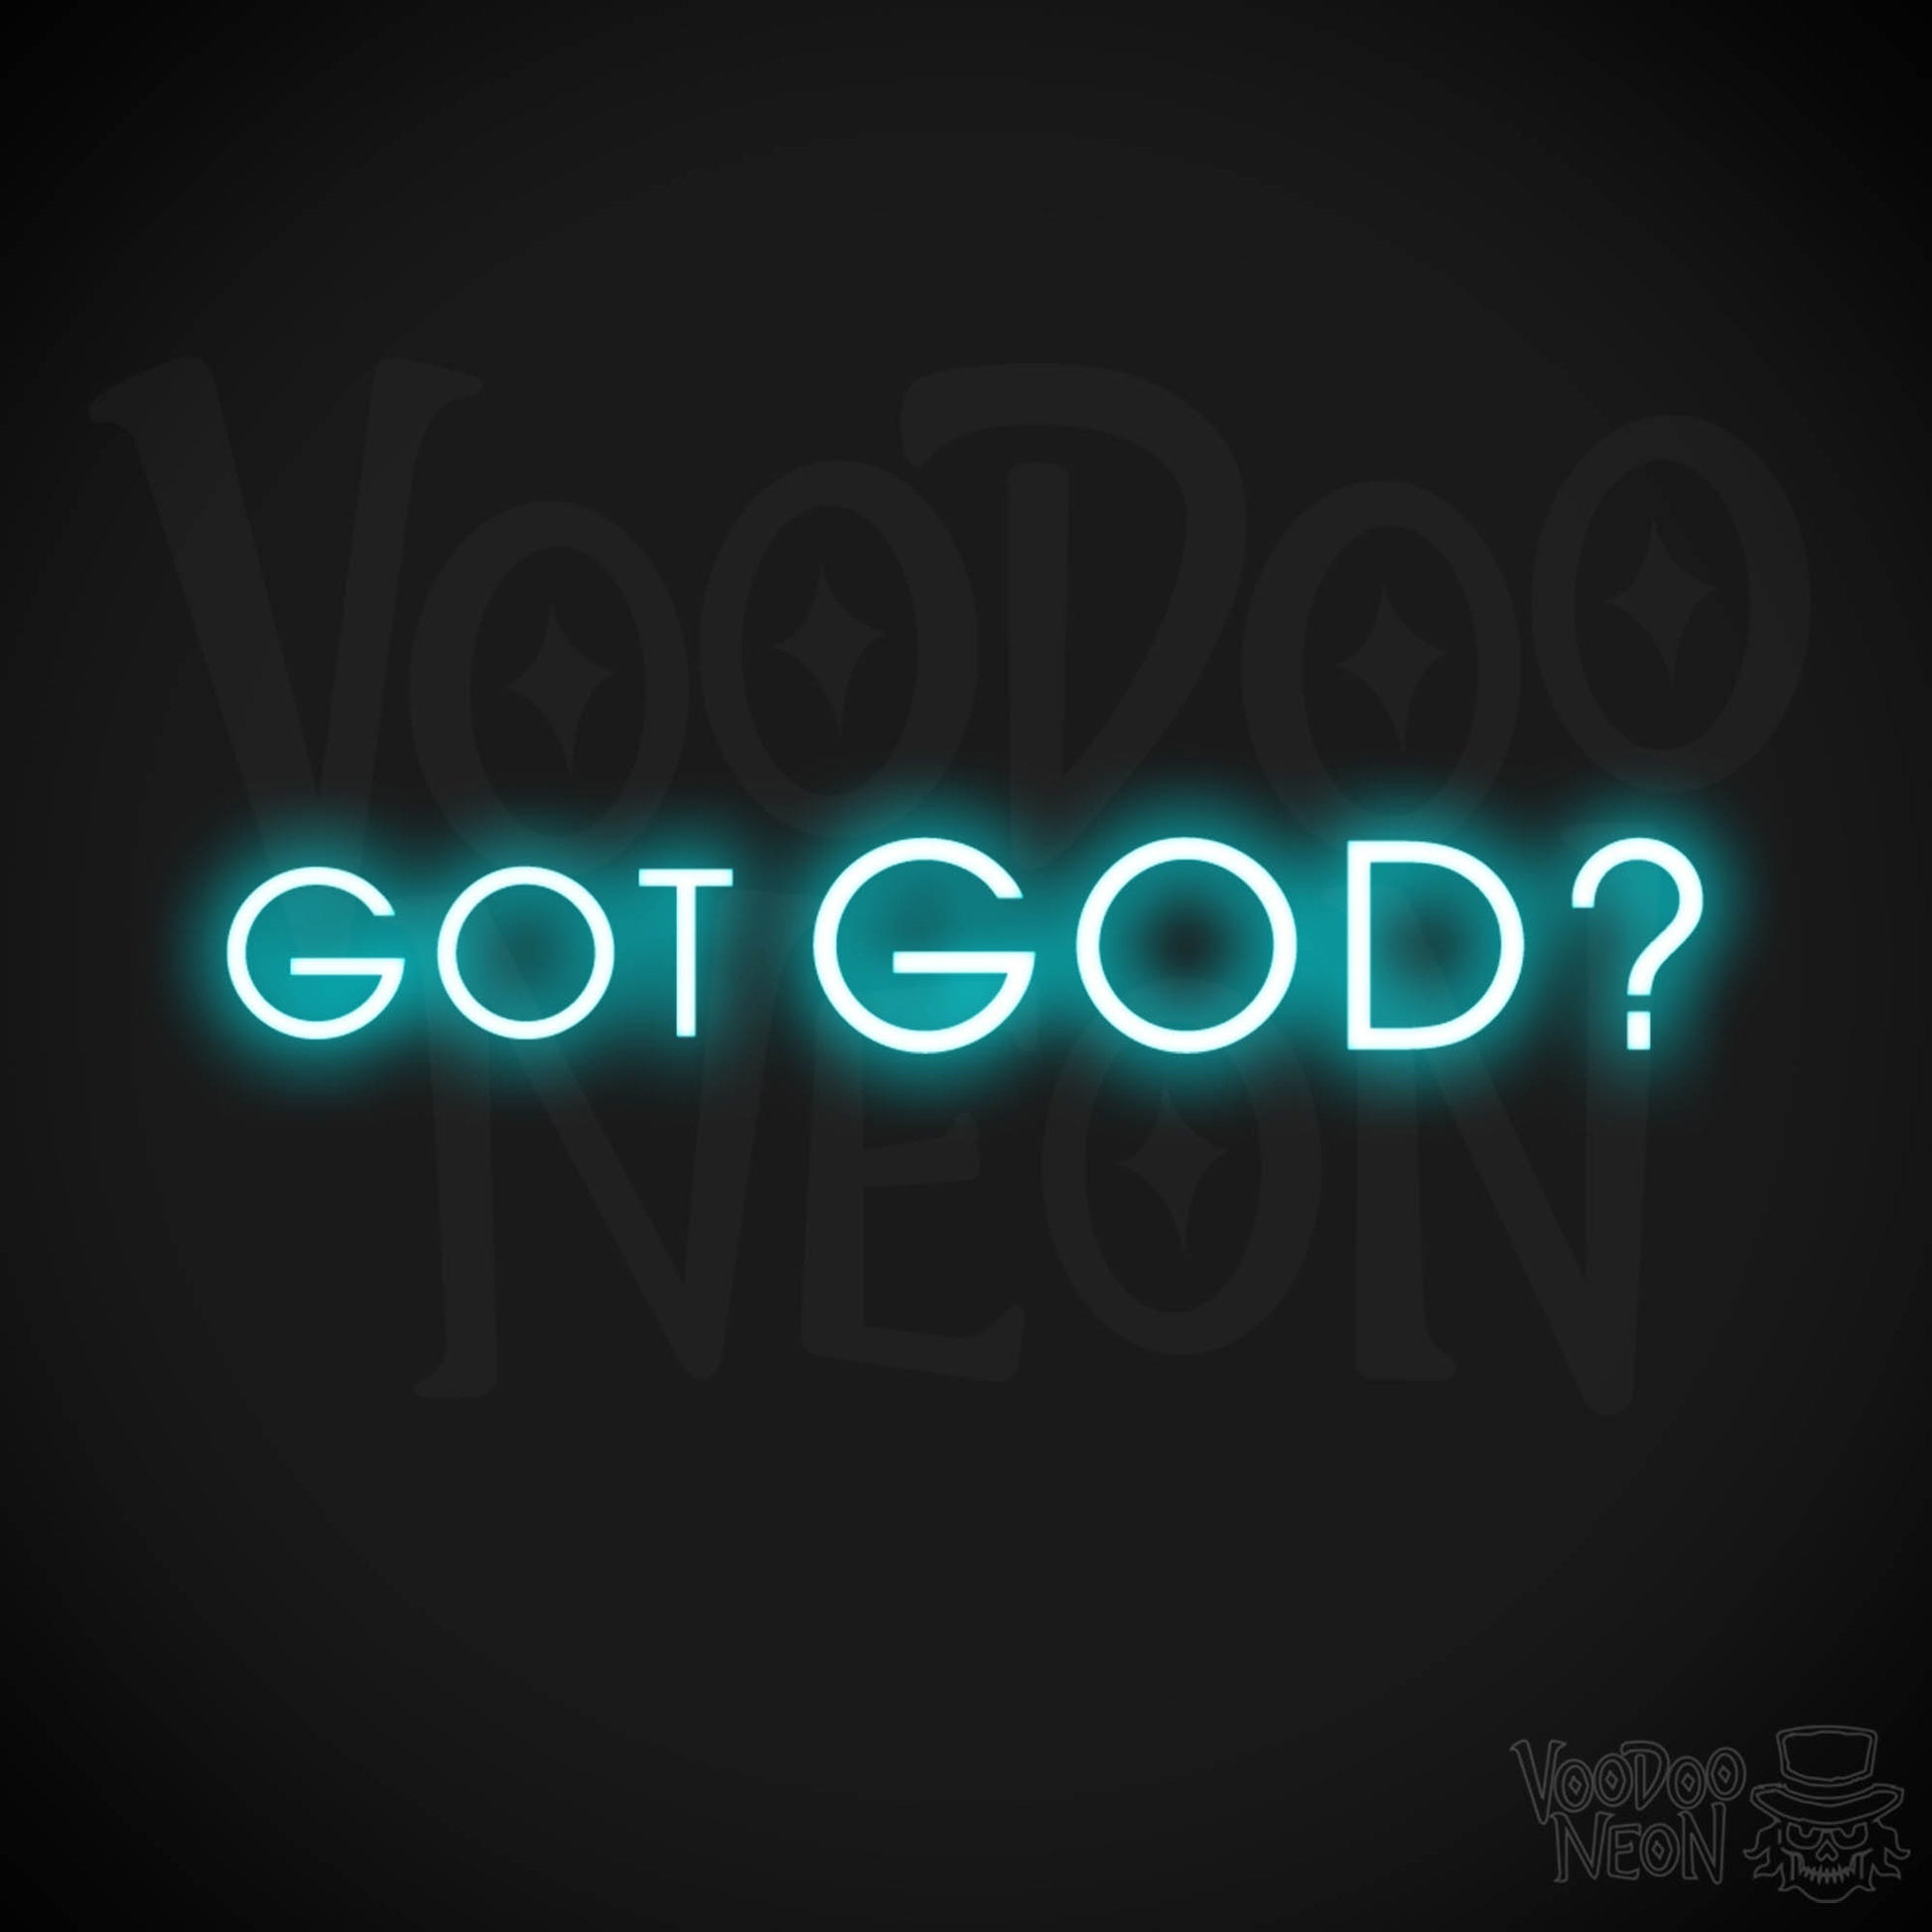 Got God Neon Sign - Neon Got God Sign - Neon God Sign - LED Wall Art - Color Ice Blue